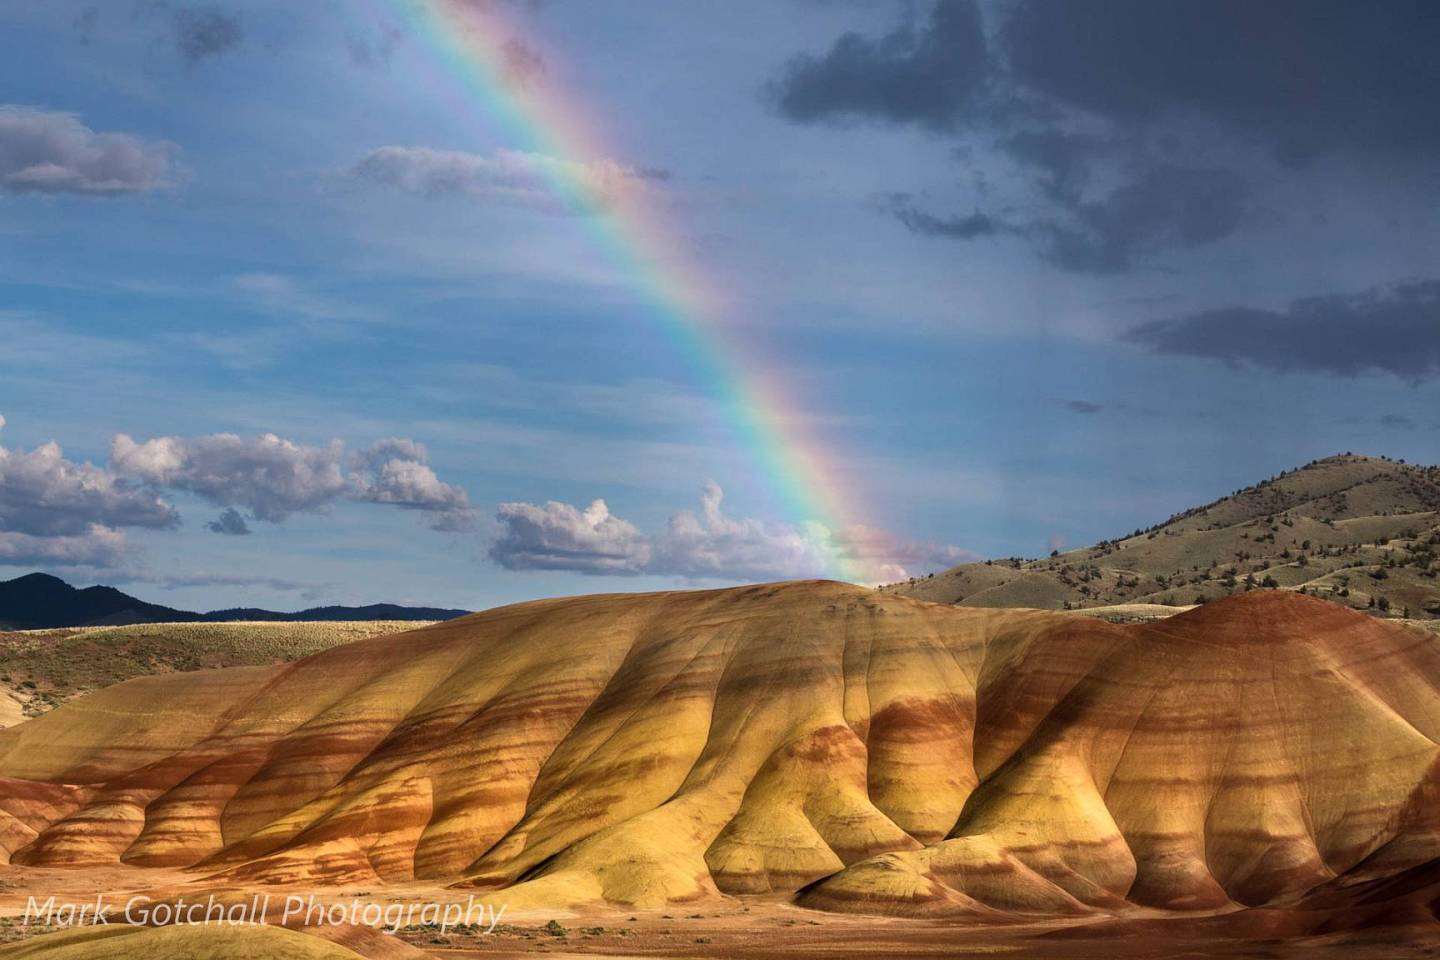 Painted Hills Rainbow; a spring rainstorm in late afternoon brings rain add a splash of color over the hills.